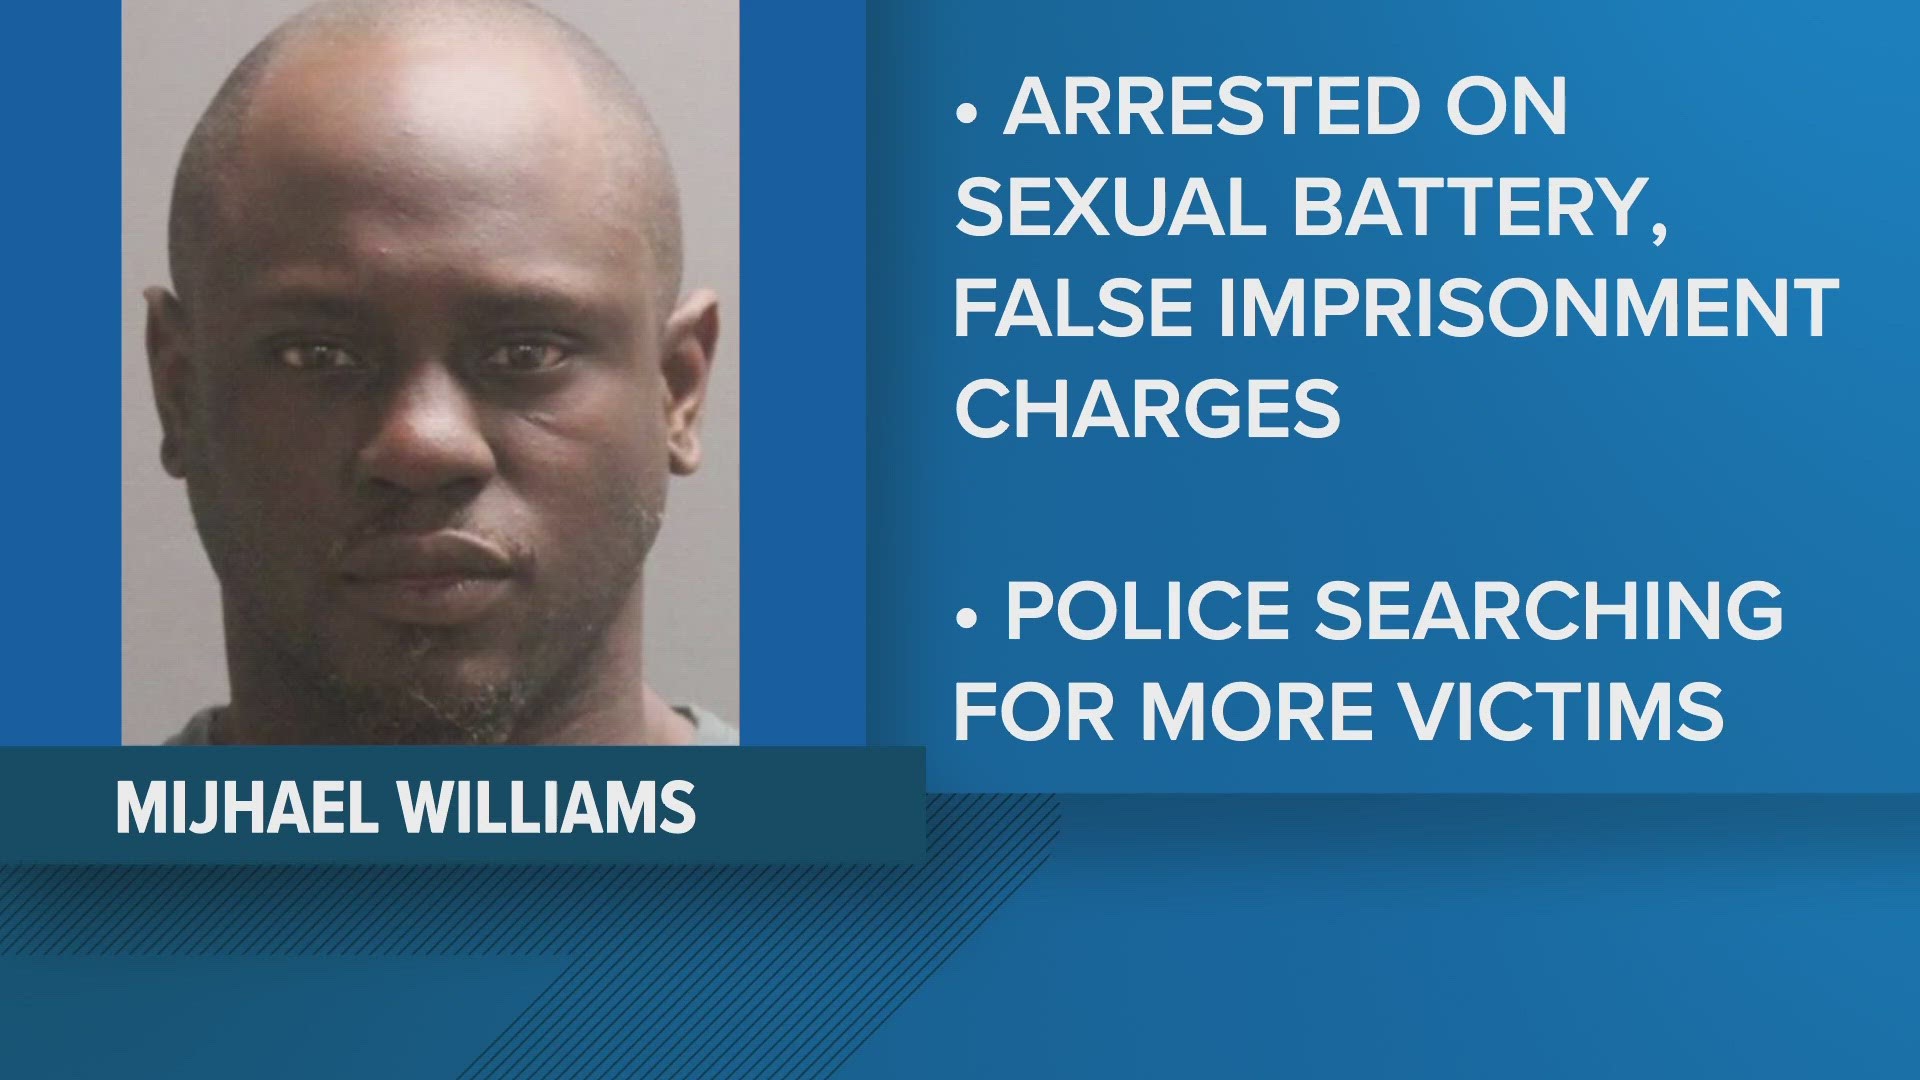 Mijhael Williams, 39, was arrested after police received information in November regarding a sexual battery that had occurred in the 2400 block of Dunn Avenue.